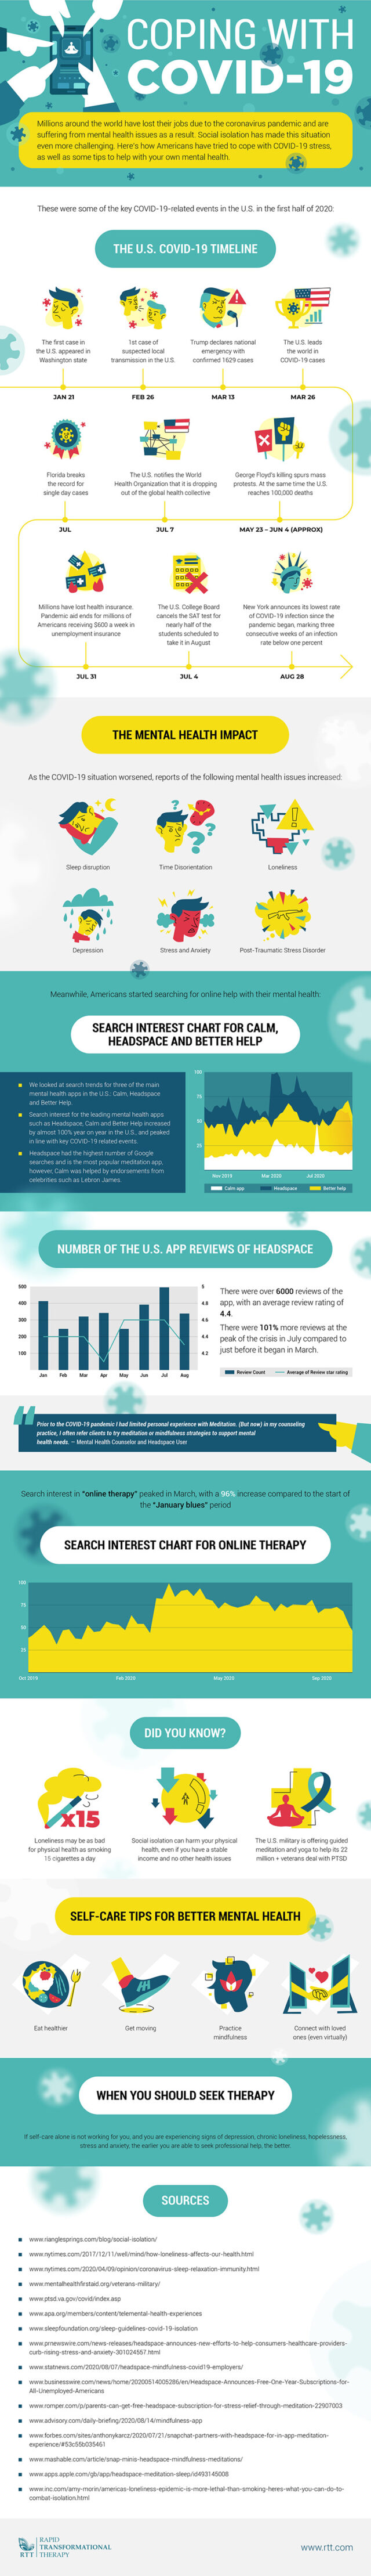 How online therapy is being used as a coping mechanism during Covid 19 infographic